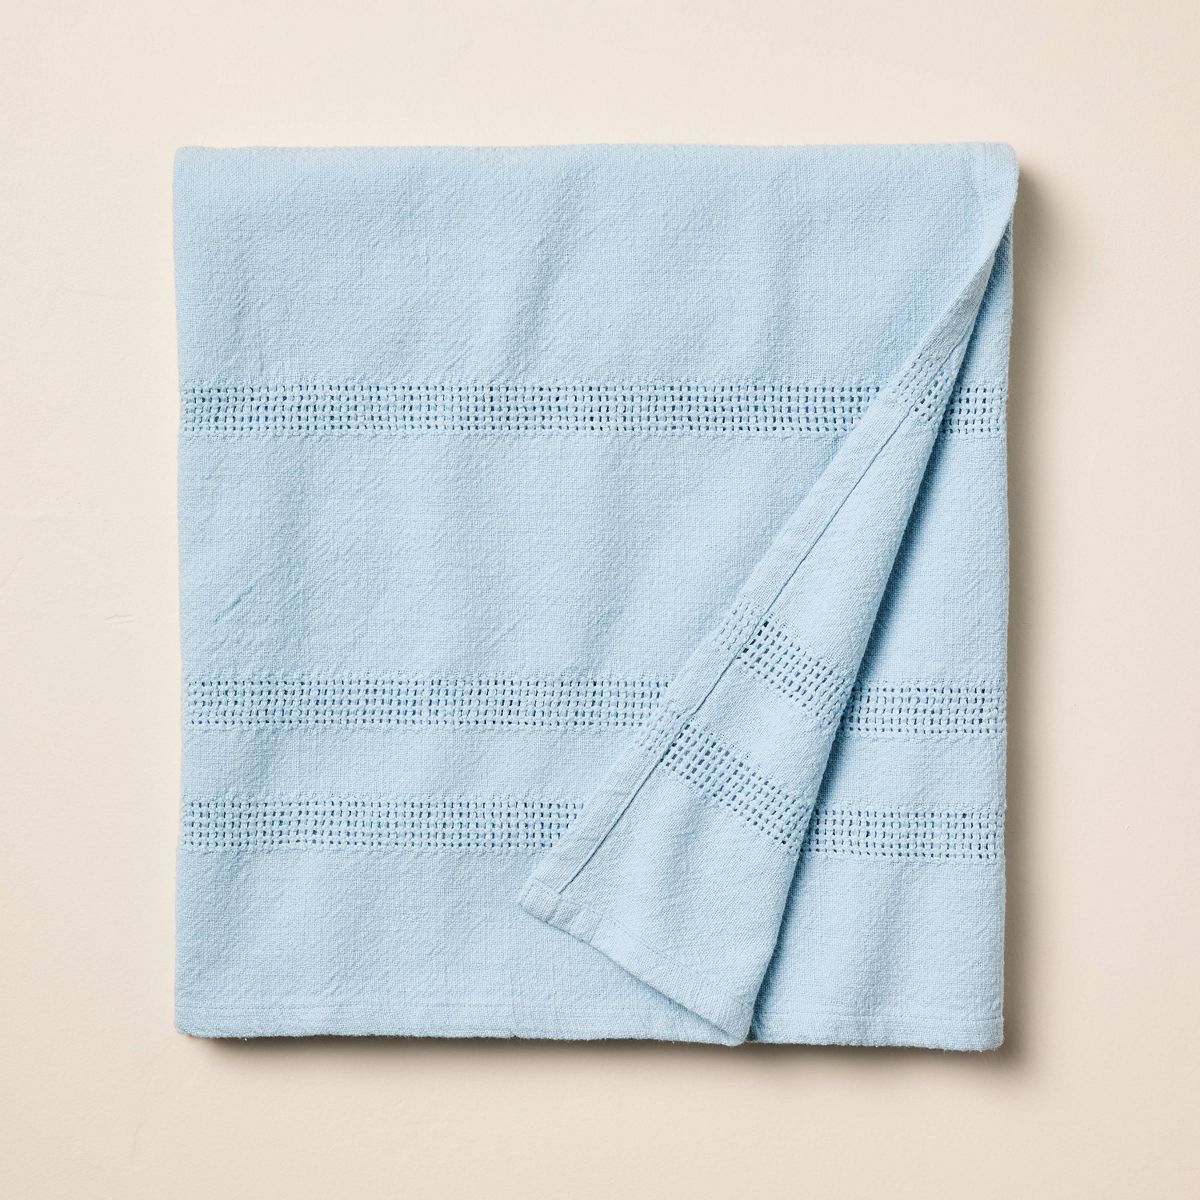 Open Textured Stripe Woven Throw Blanket Light Blue - Hearth & Hand™ with Magnolia | Target